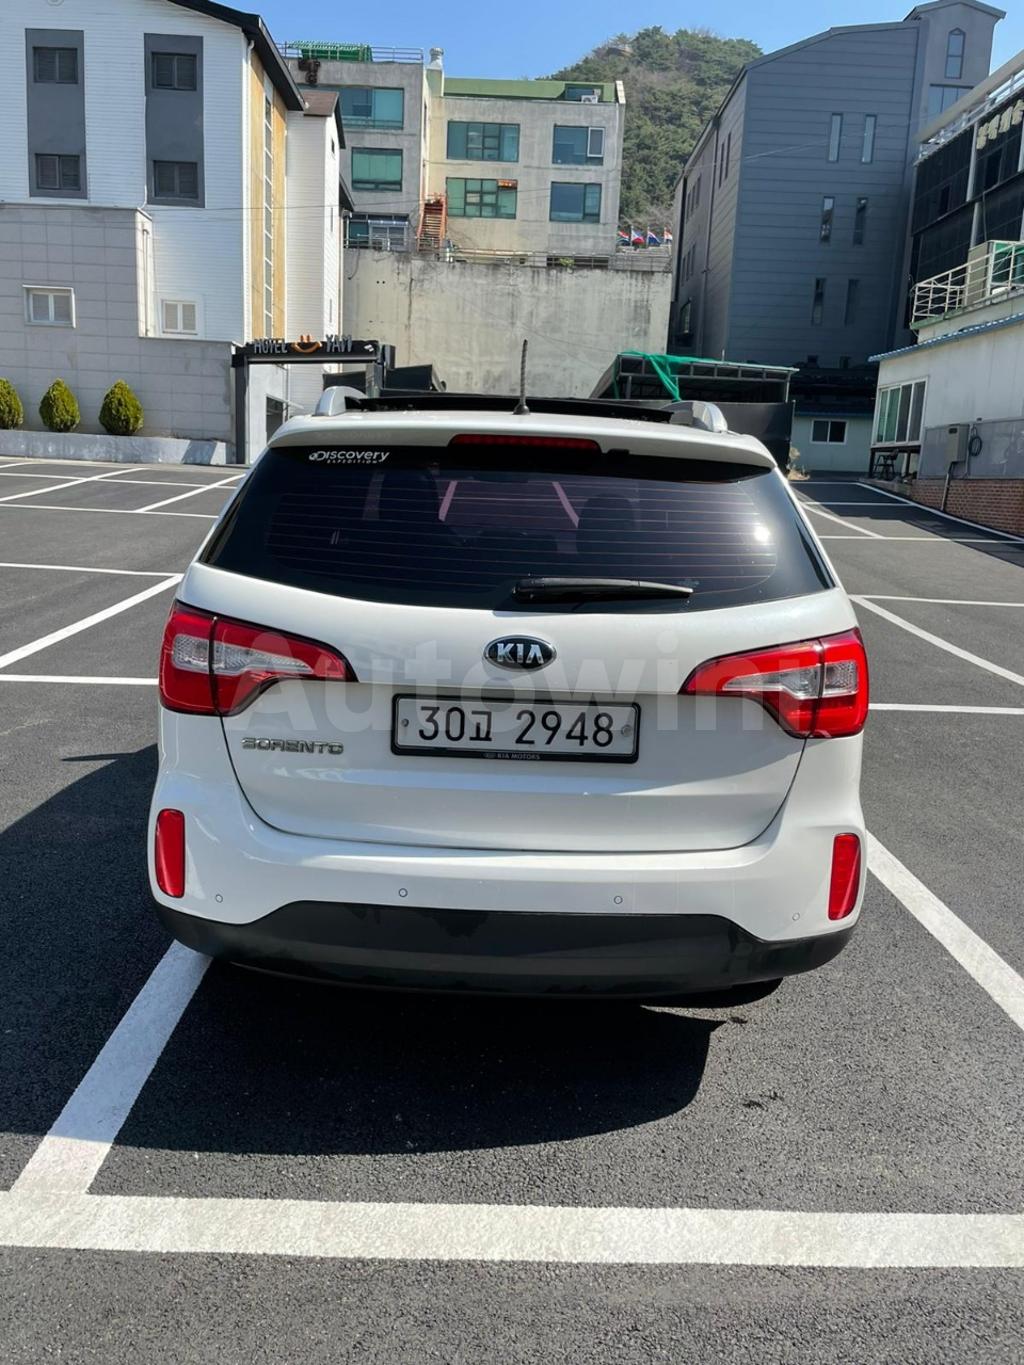 KNAKW815BEA479226   ?RE-CARVED VIN NUMBER  BUYERS NEED TO CHECK IF RE-CARVED VIN NUMBERS ARE ALLOWED IN THEIR COUNTRY TO AVOID CUSTOMS ISSUES BEFORE BOOKING. 2014 KIA  SORENTO R TLX LIMITED-3